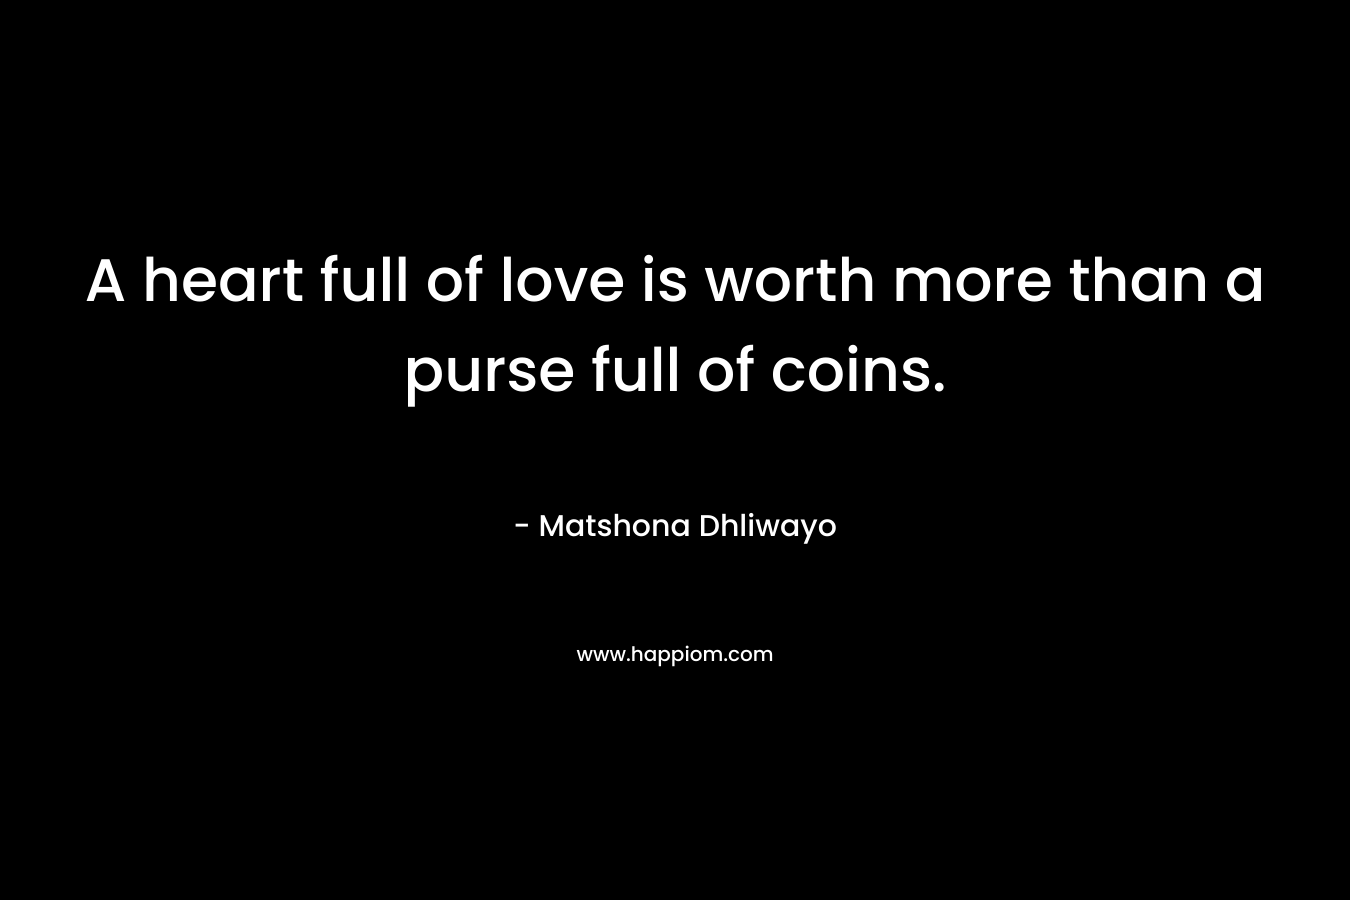 A heart full of love is worth more than a purse full of coins.